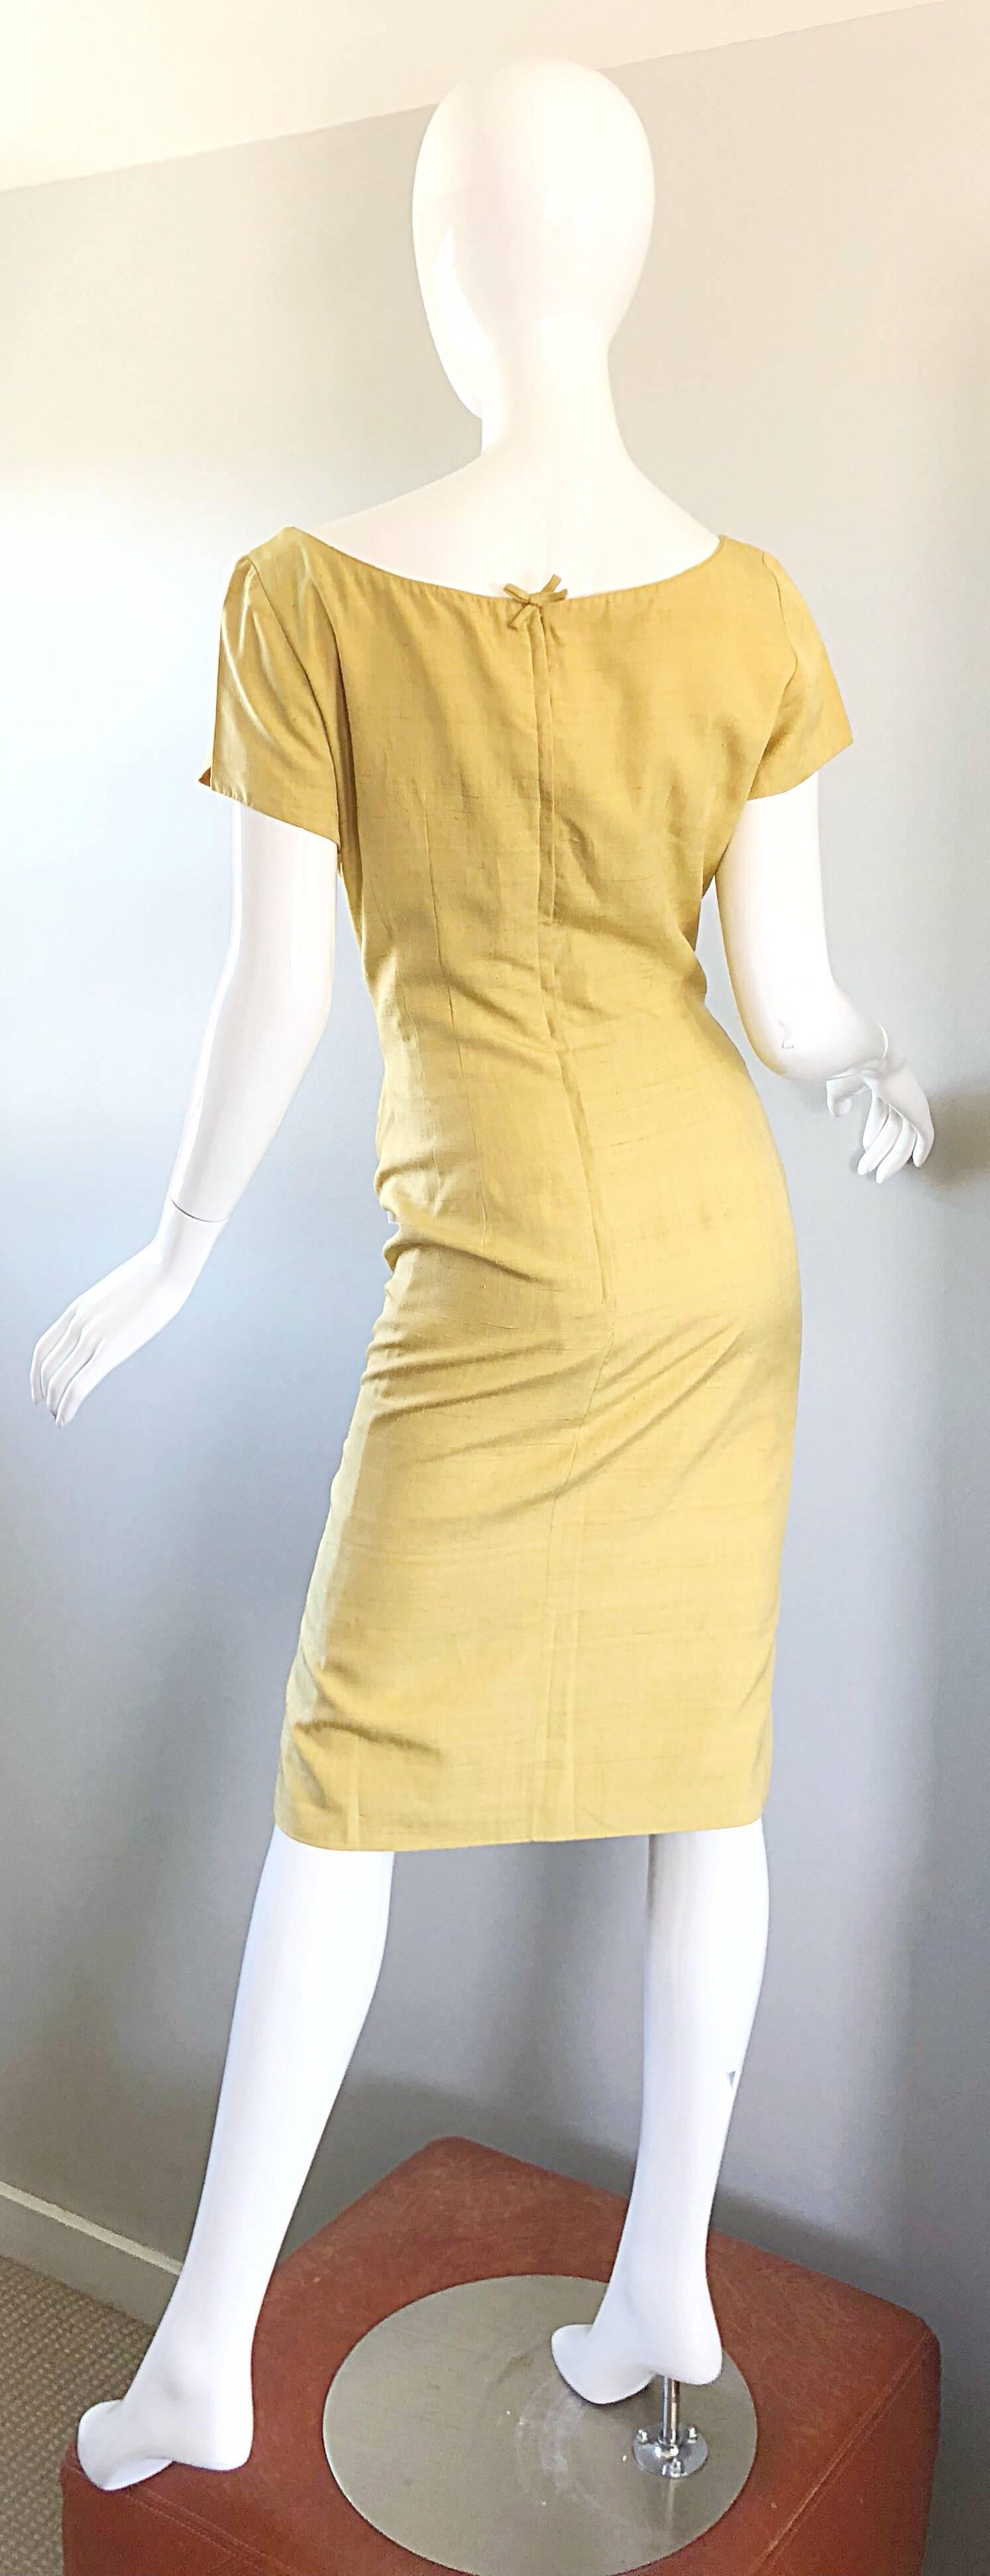 1950s Mr. Blackwell Current Size 10 / 12 Mustard Yellow Silk Vintage 50s Dress For Sale 2